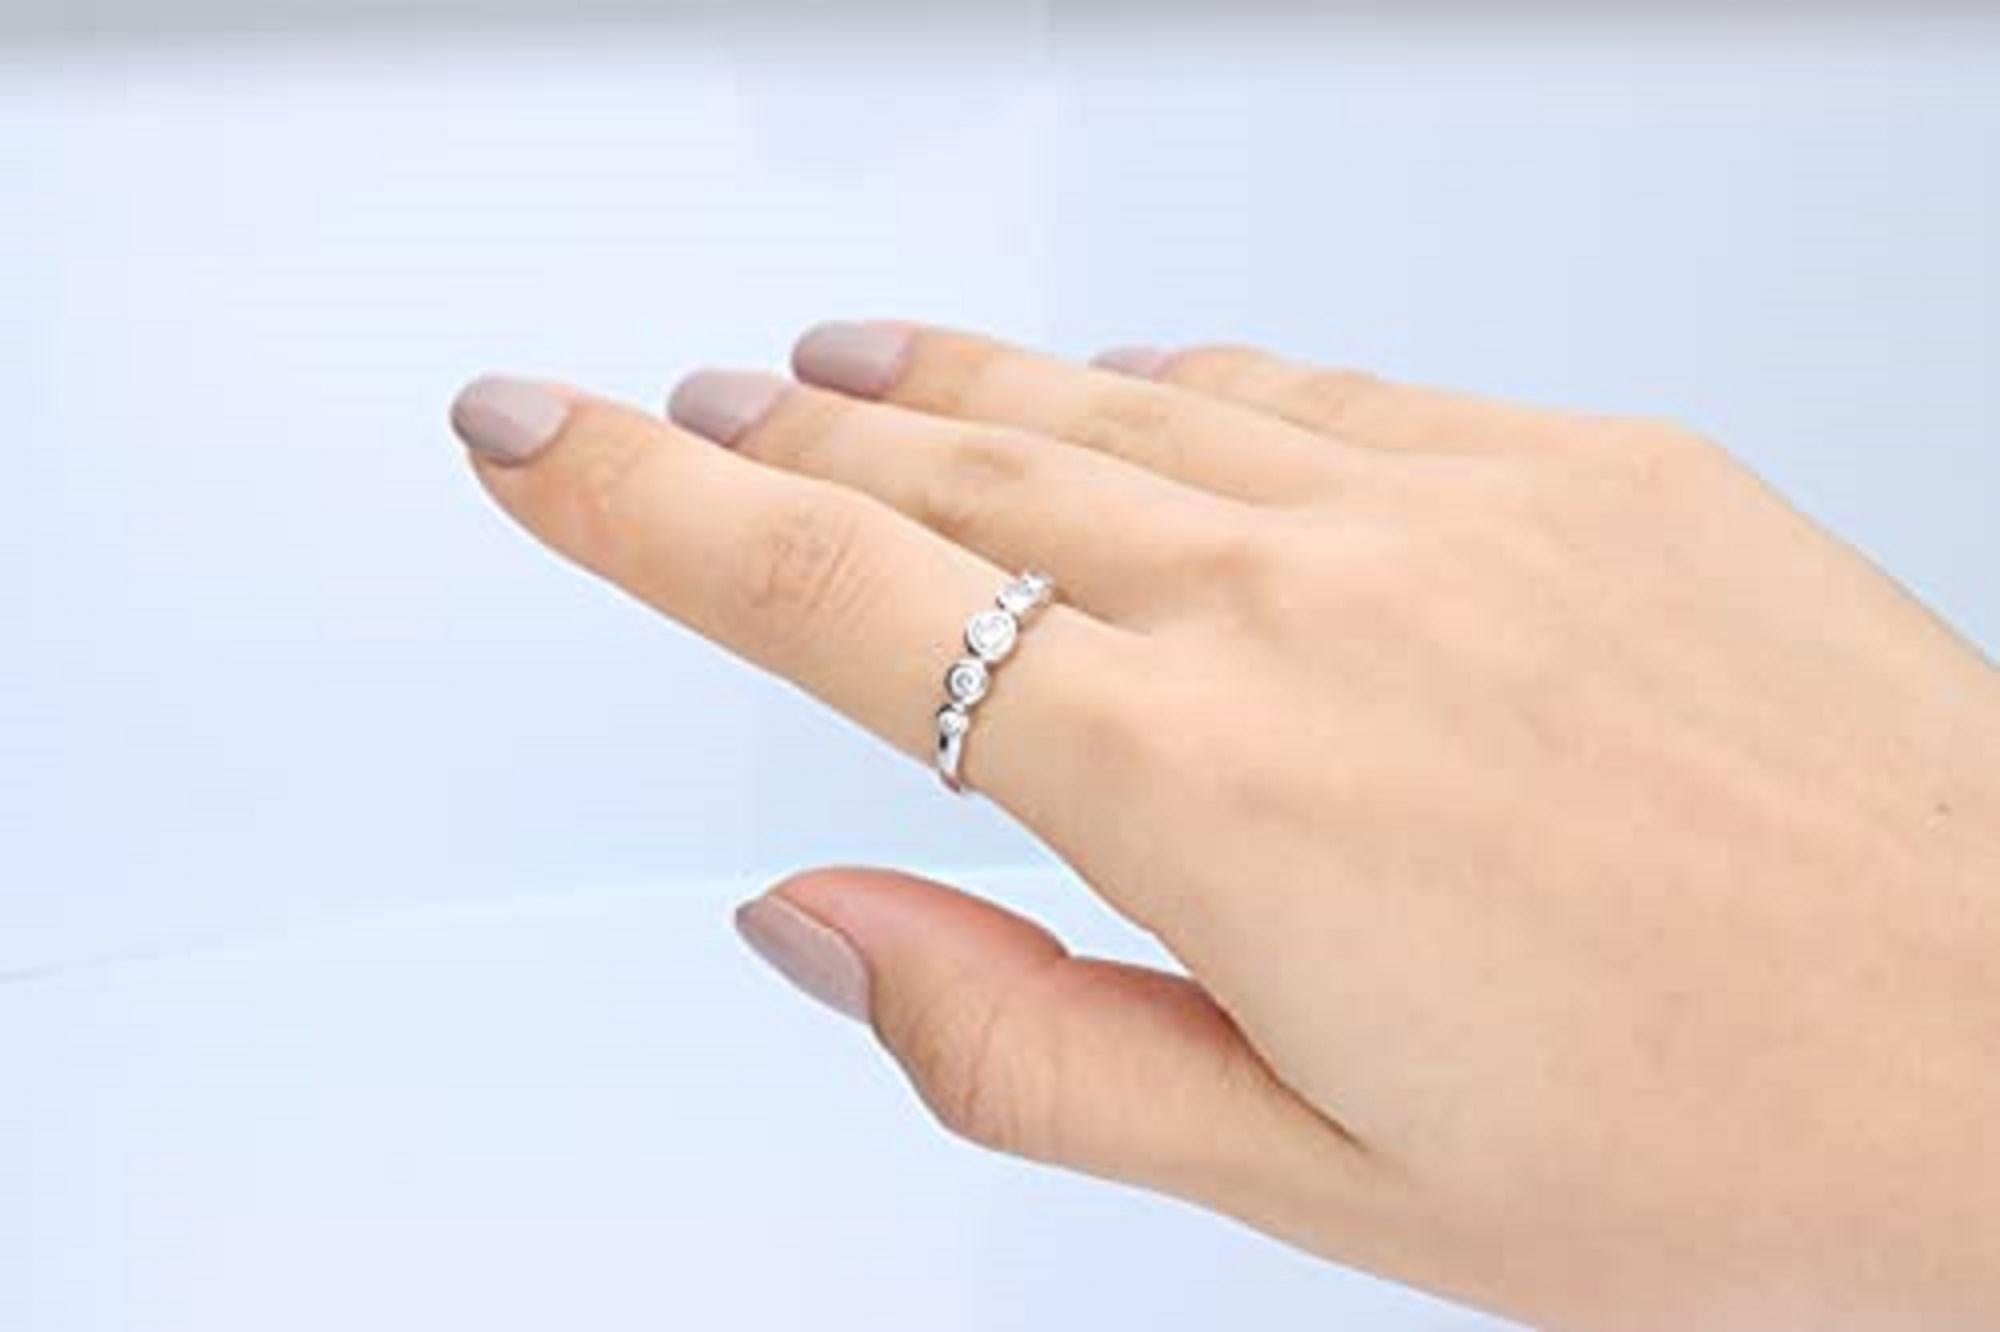 Decorate yourself in elegance with this Ring is crafted from 14-karat White Gold by Gin & Grace. This Ring is made up of Round-cut Diamond (5 pcs) 0.42 Carat. This Ring is weight 2.22 grams. This delicate Ring is polished to a high finish shine.